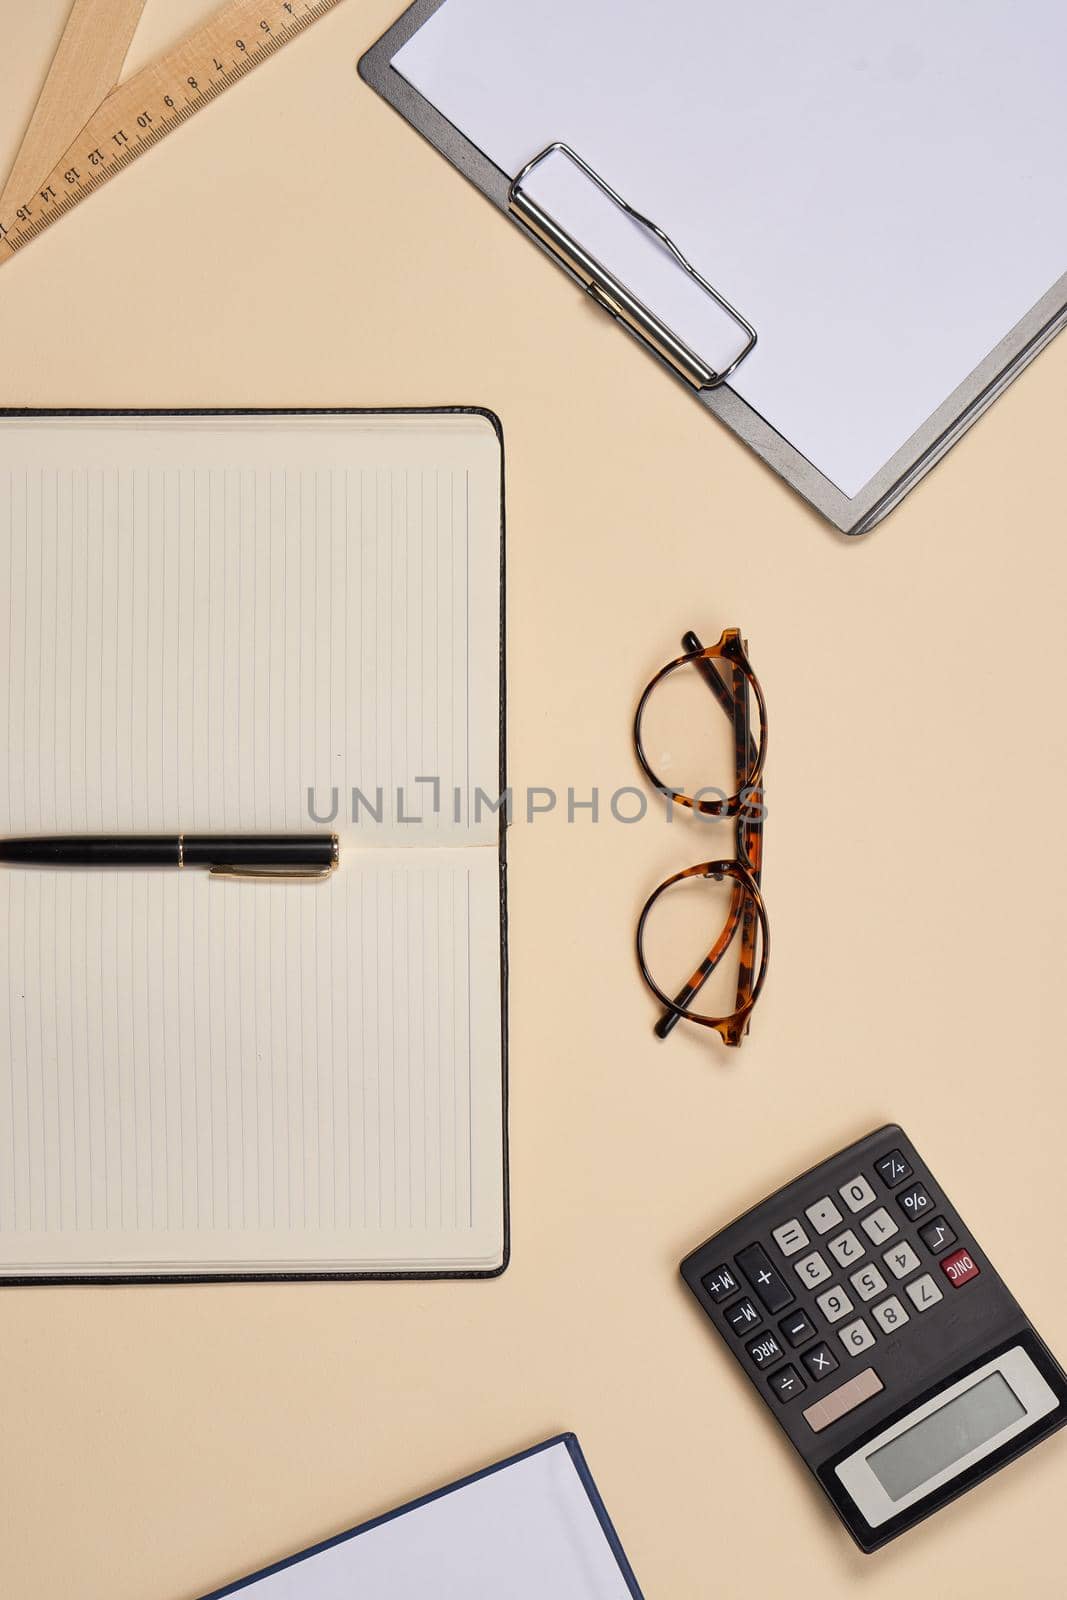 documents office supplies calculator accessories office top view. High quality photo